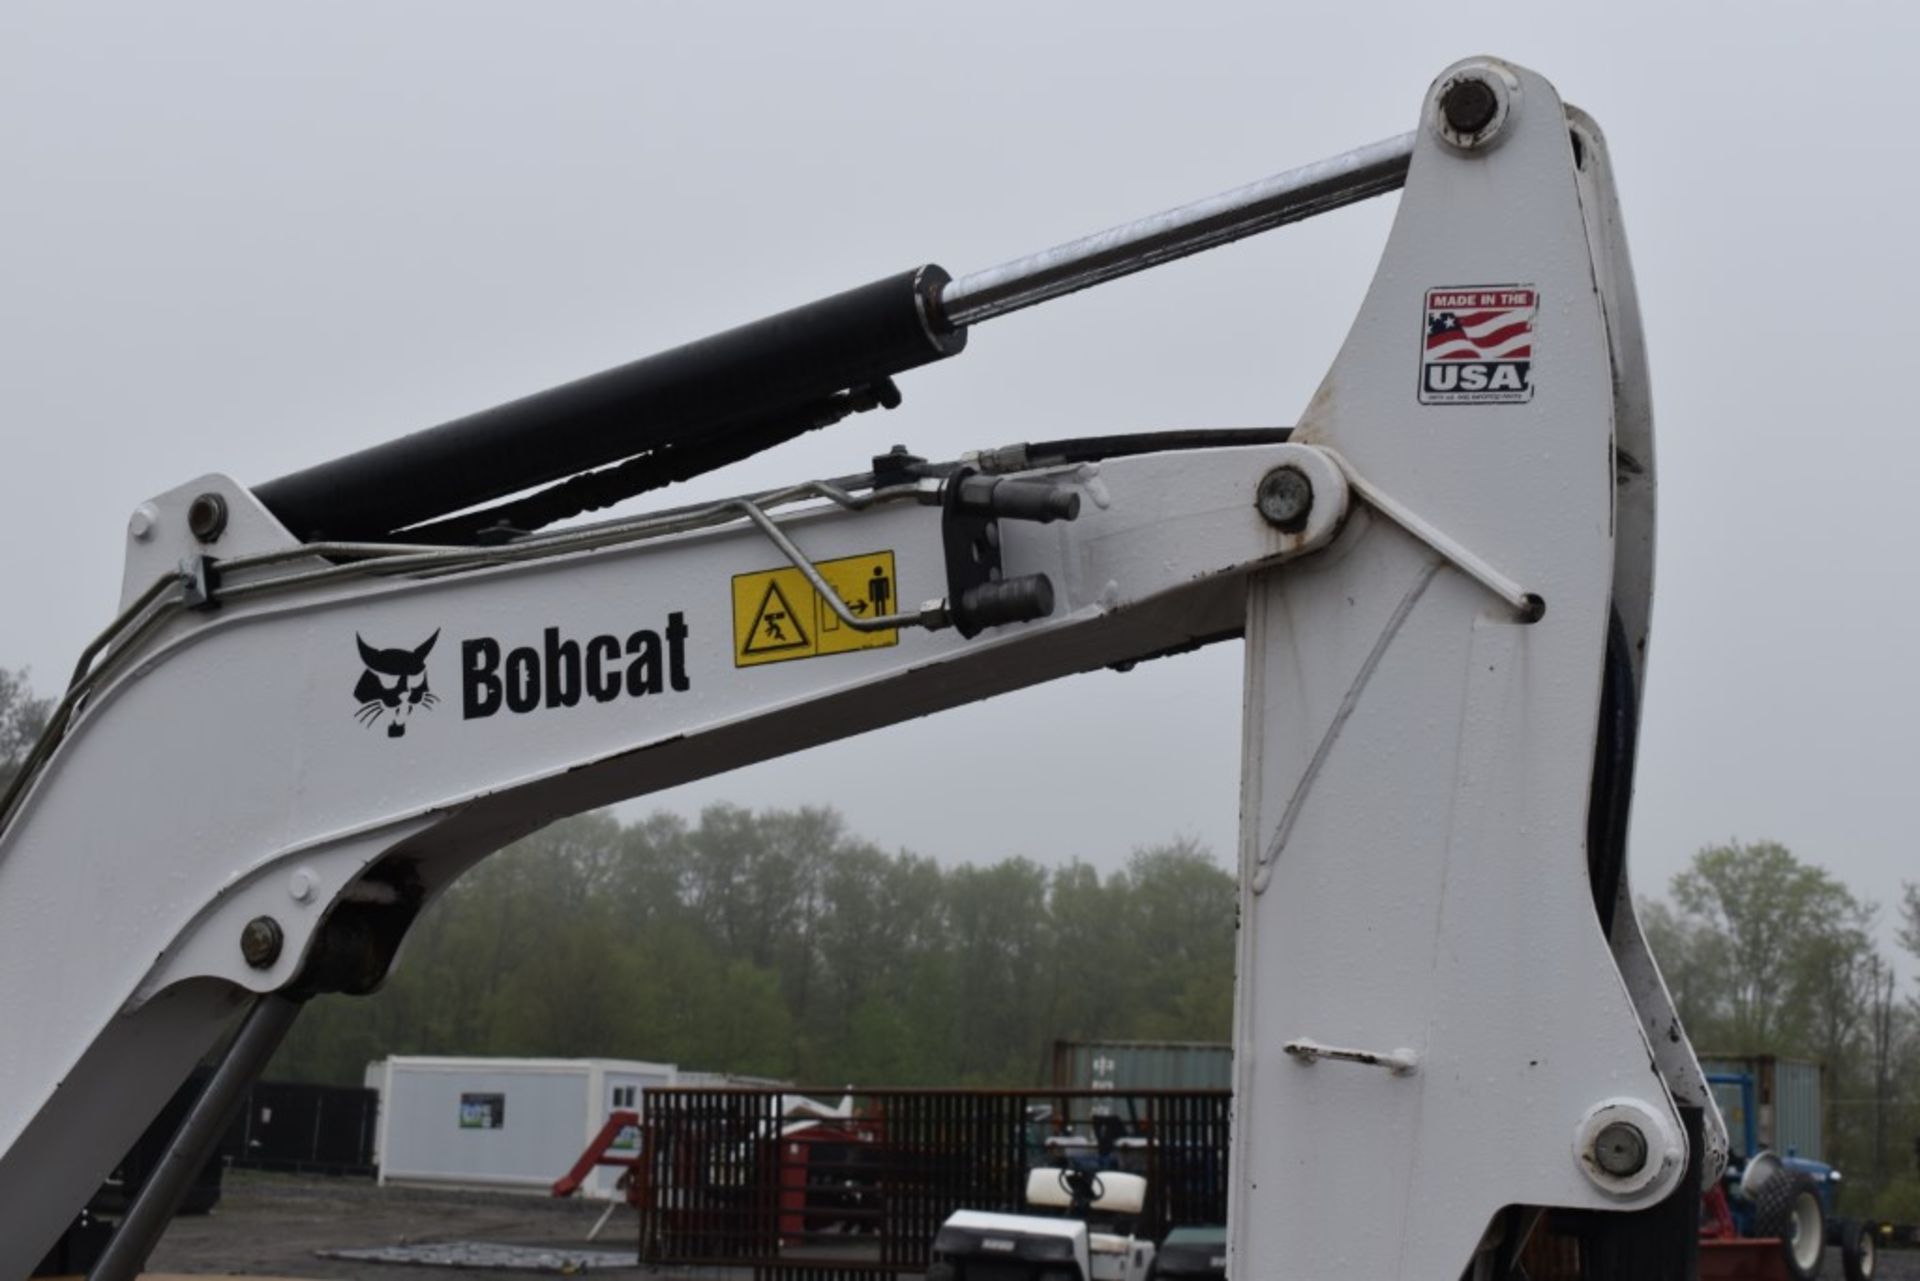 2020 Bobcat E35i Excavator 1006 Hours, Runs and Operates, 18" Bucket, Dual Auxiliary Hydraulics, - Image 10 of 36